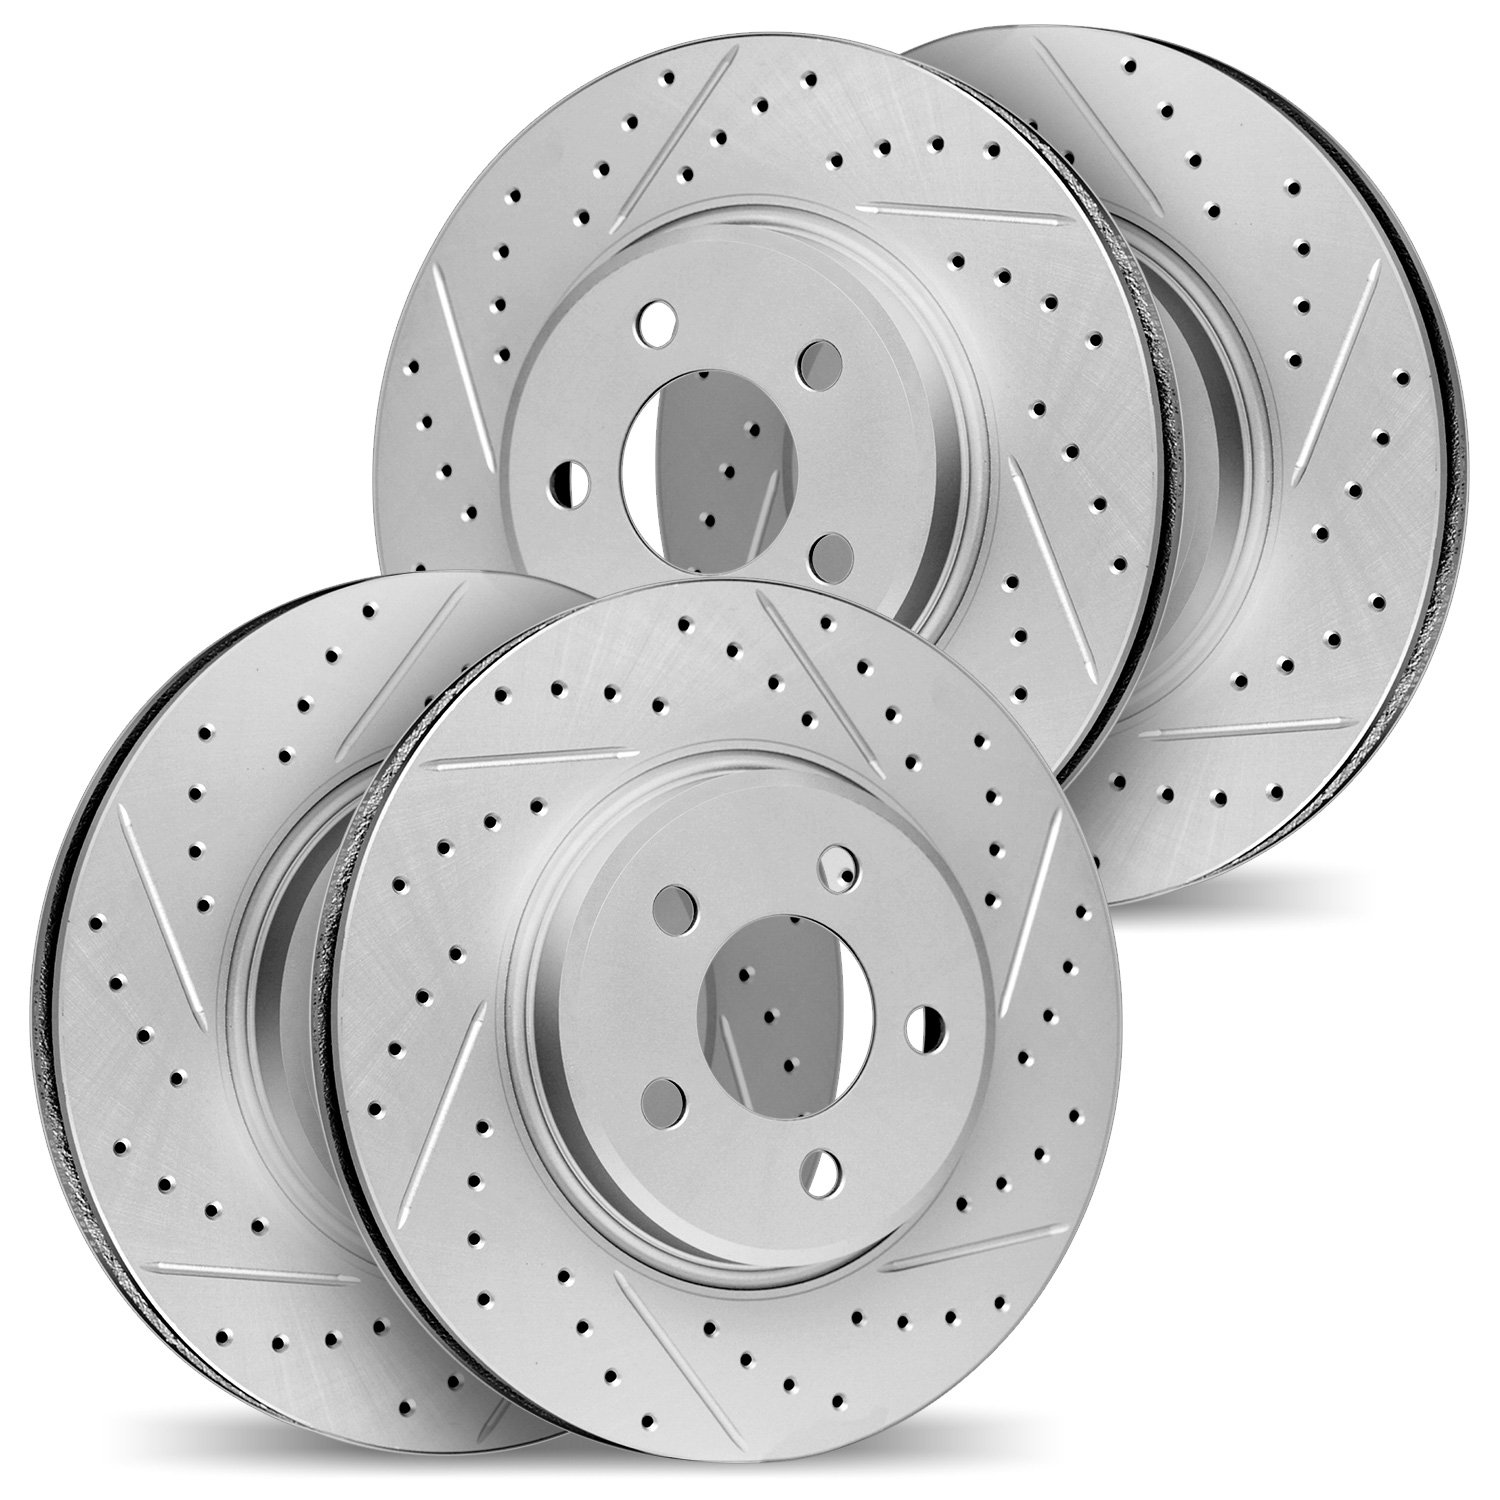 2004-58004 Geoperformance Drilled/Slotted Brake Rotors, 1991-1996 Acura/Honda, Position: Front and Rear